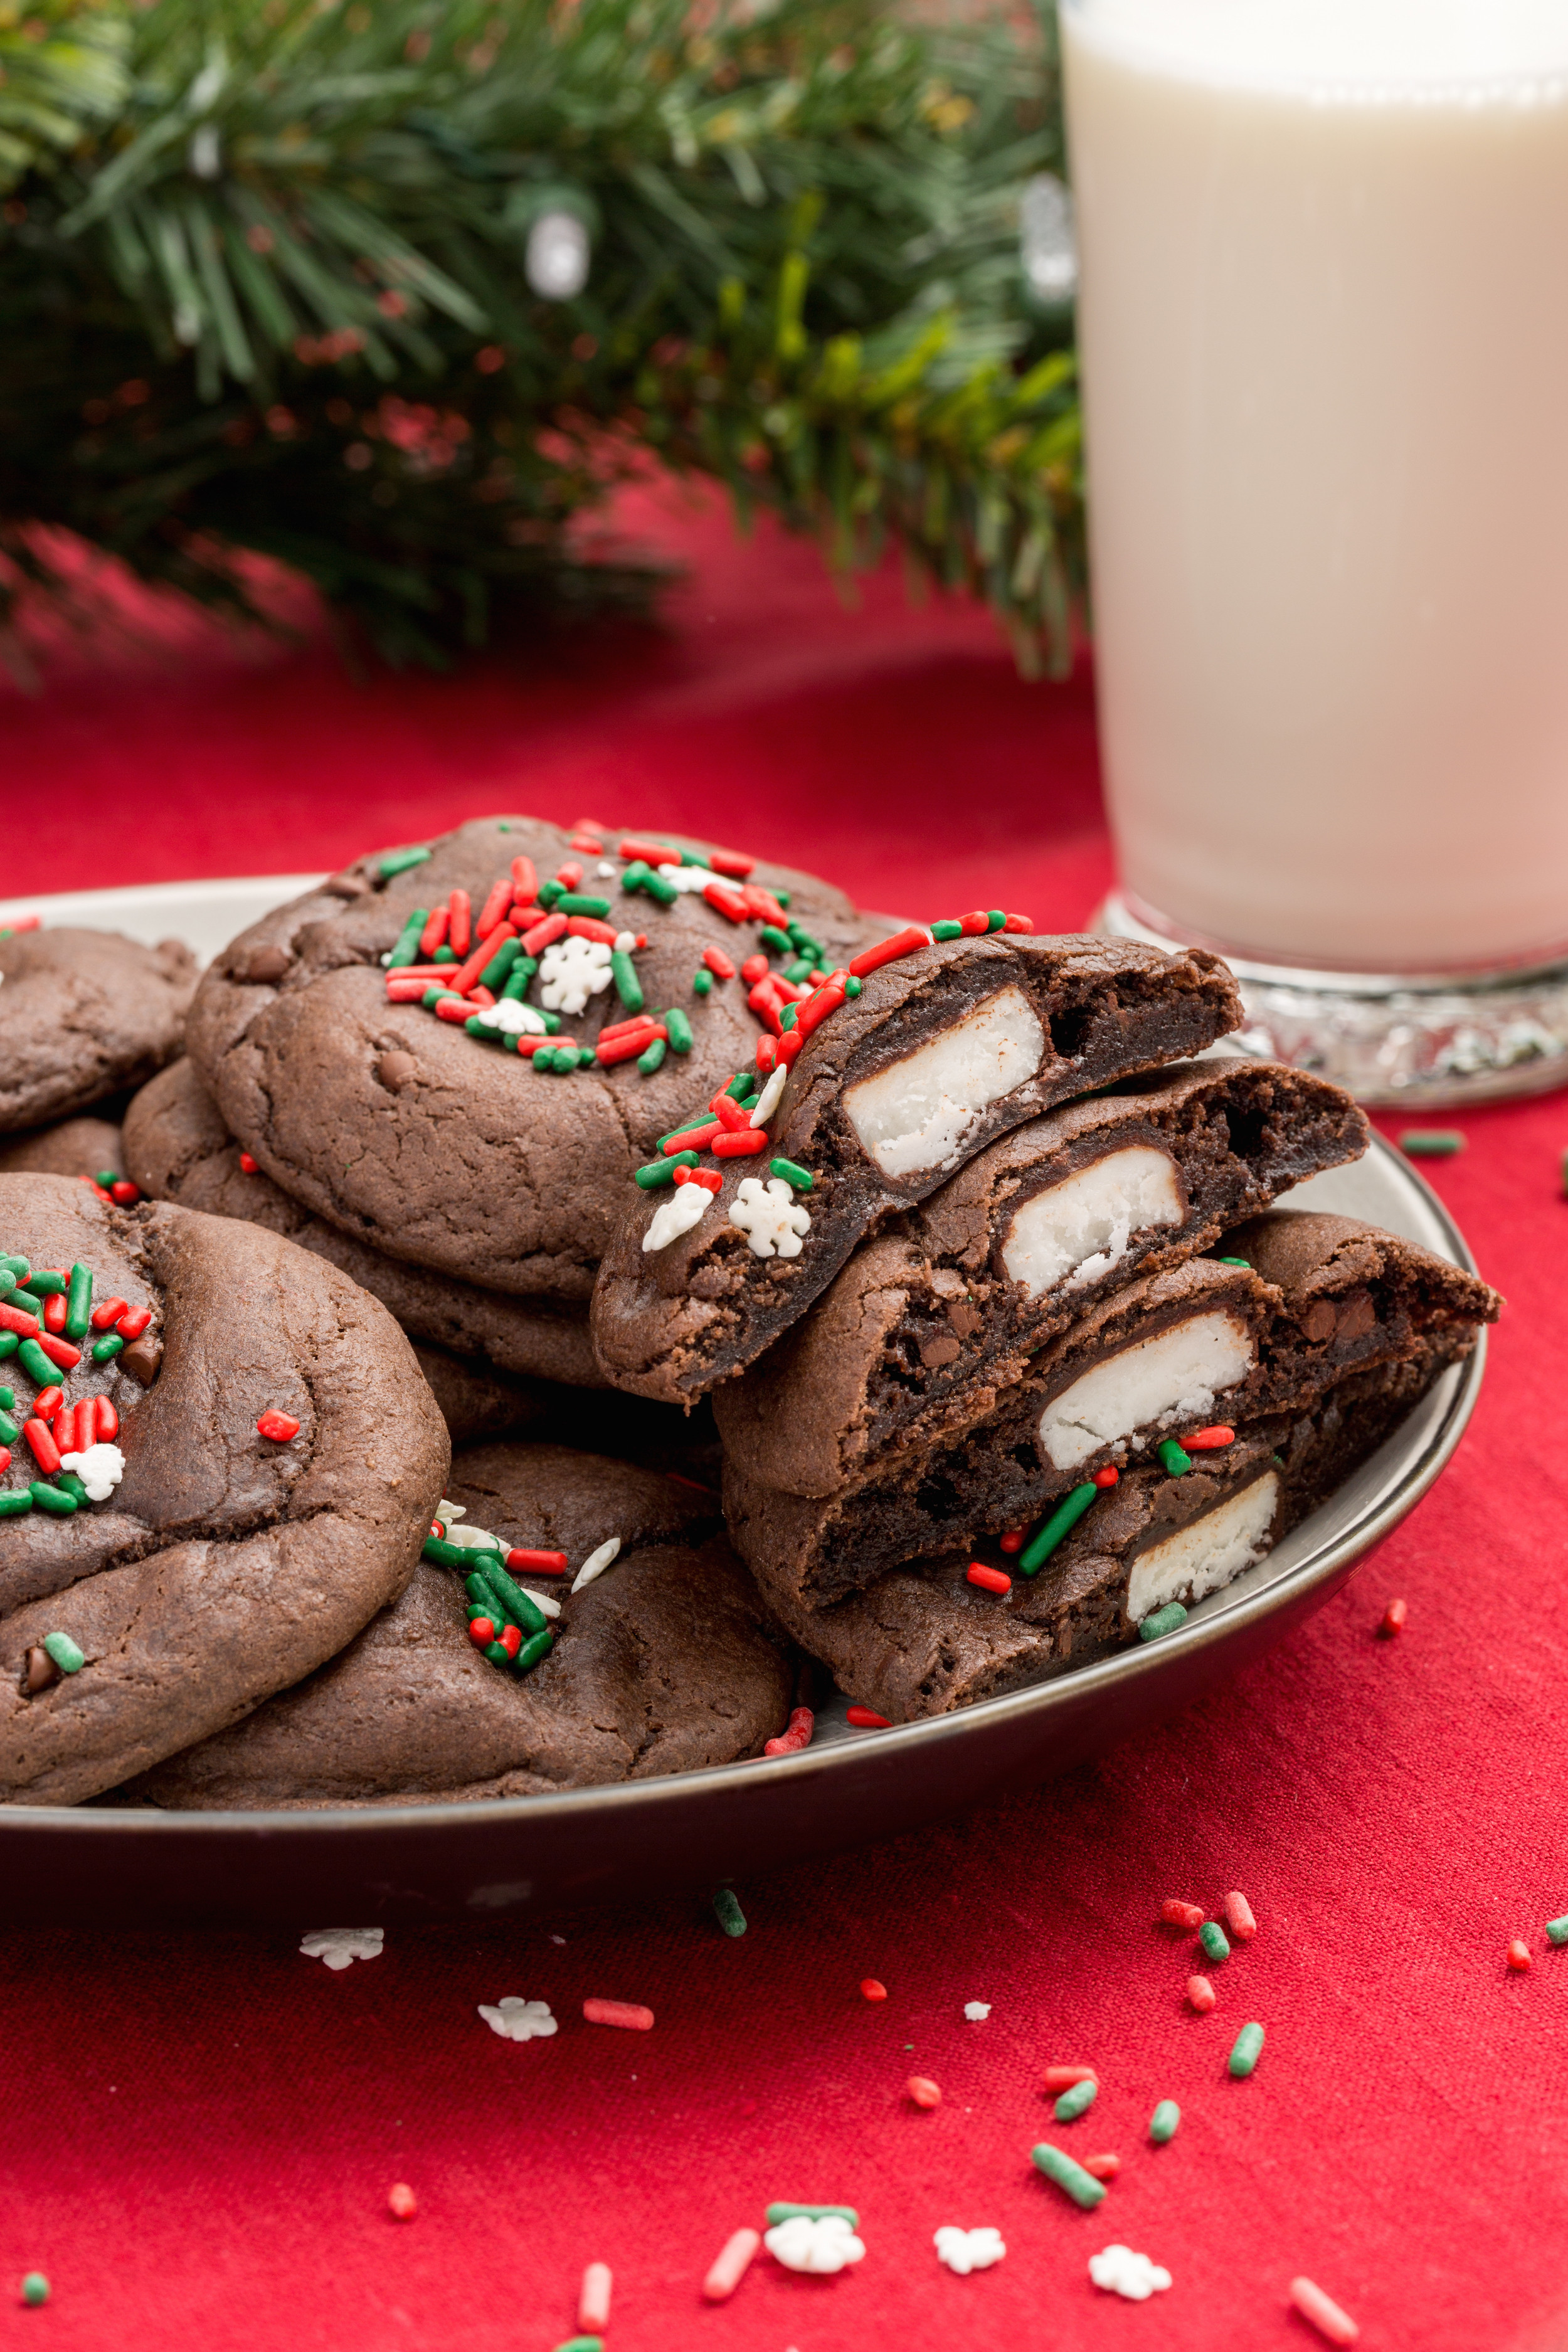 Top 10 Christmas Cookies Of All Time
 80 Easy Christmas Cookies Best Recipes for Holiday